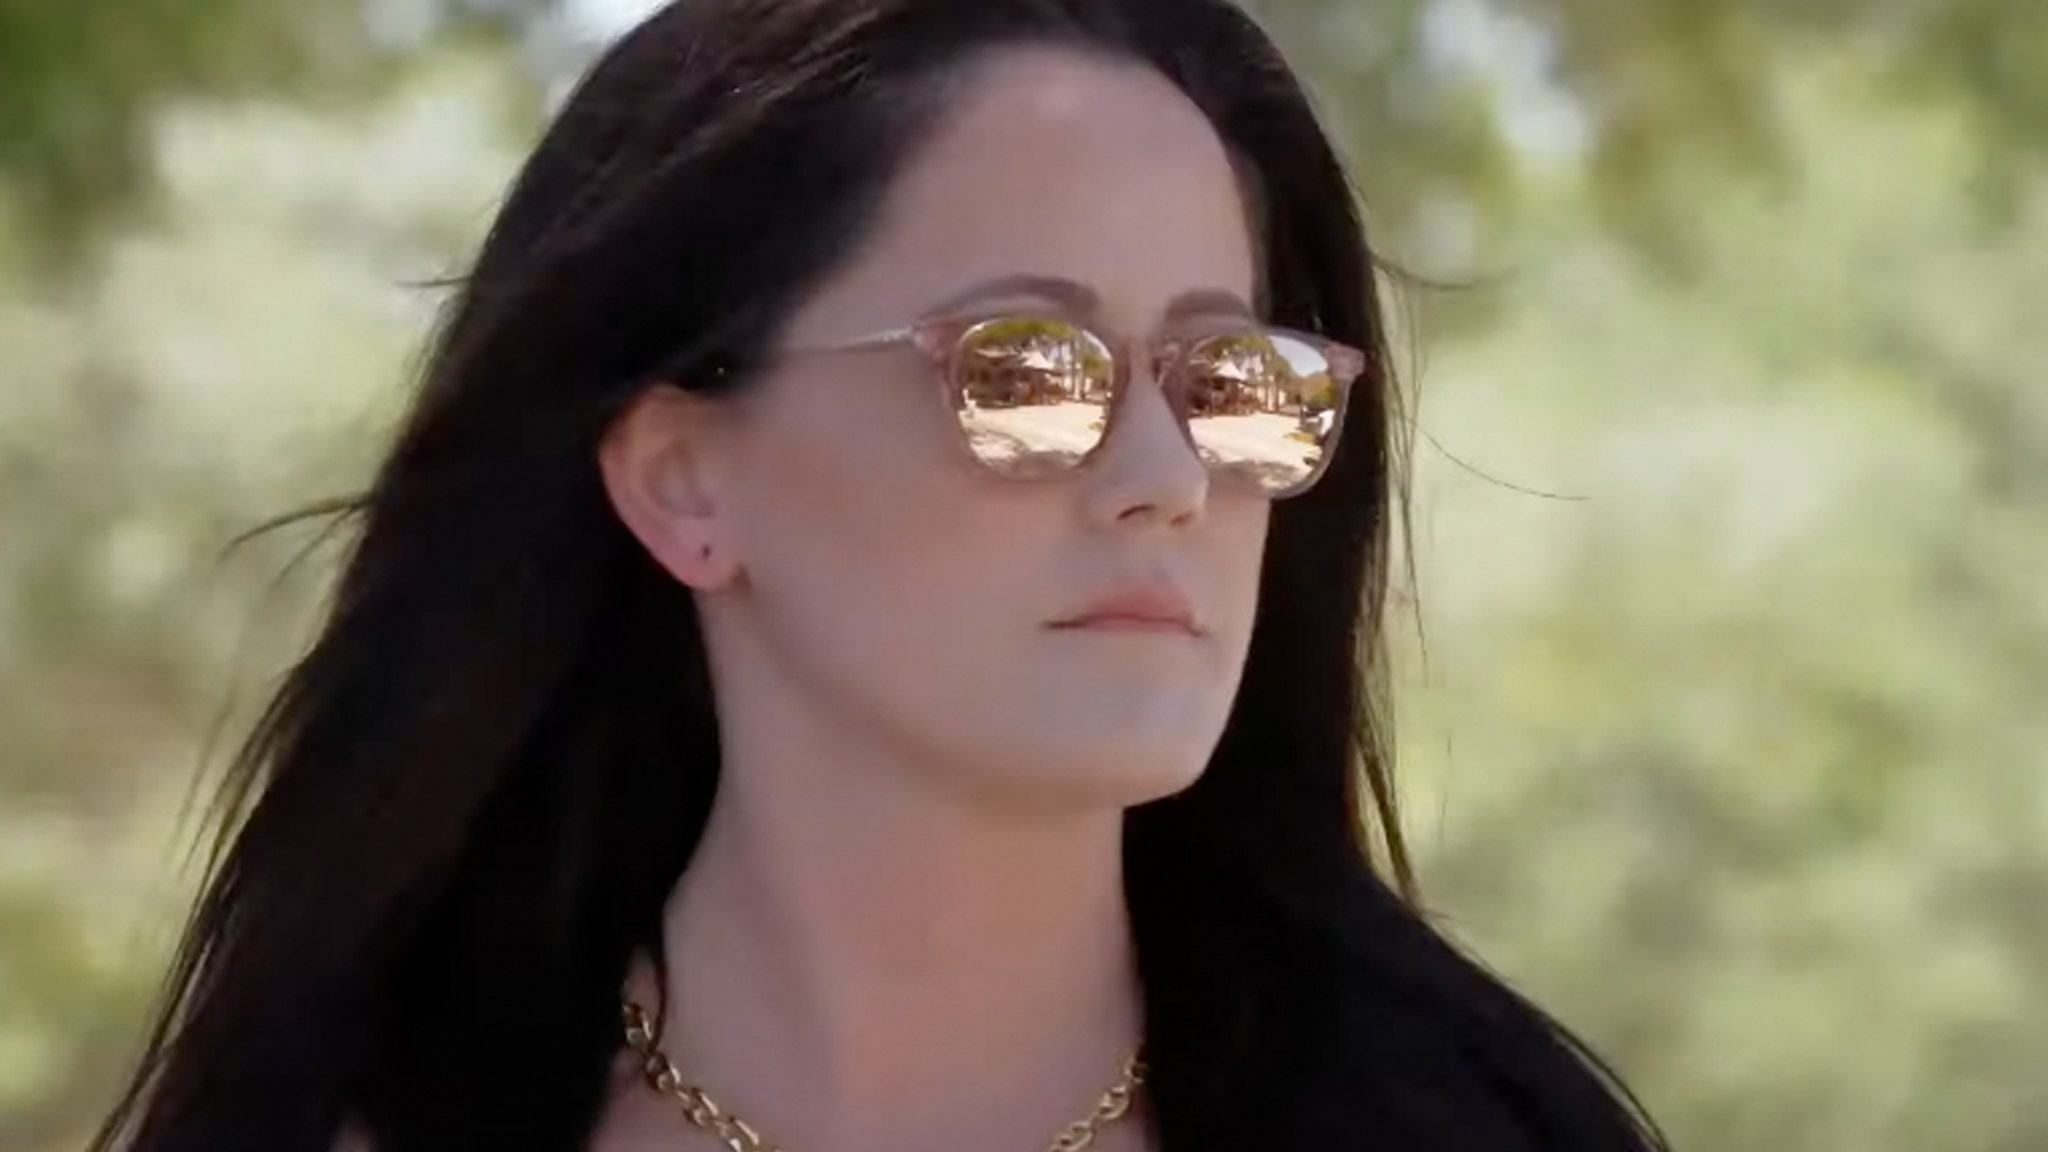 Jenelle Evans Returns to Teen Mom: The Next Chapter In Trailer for New Season